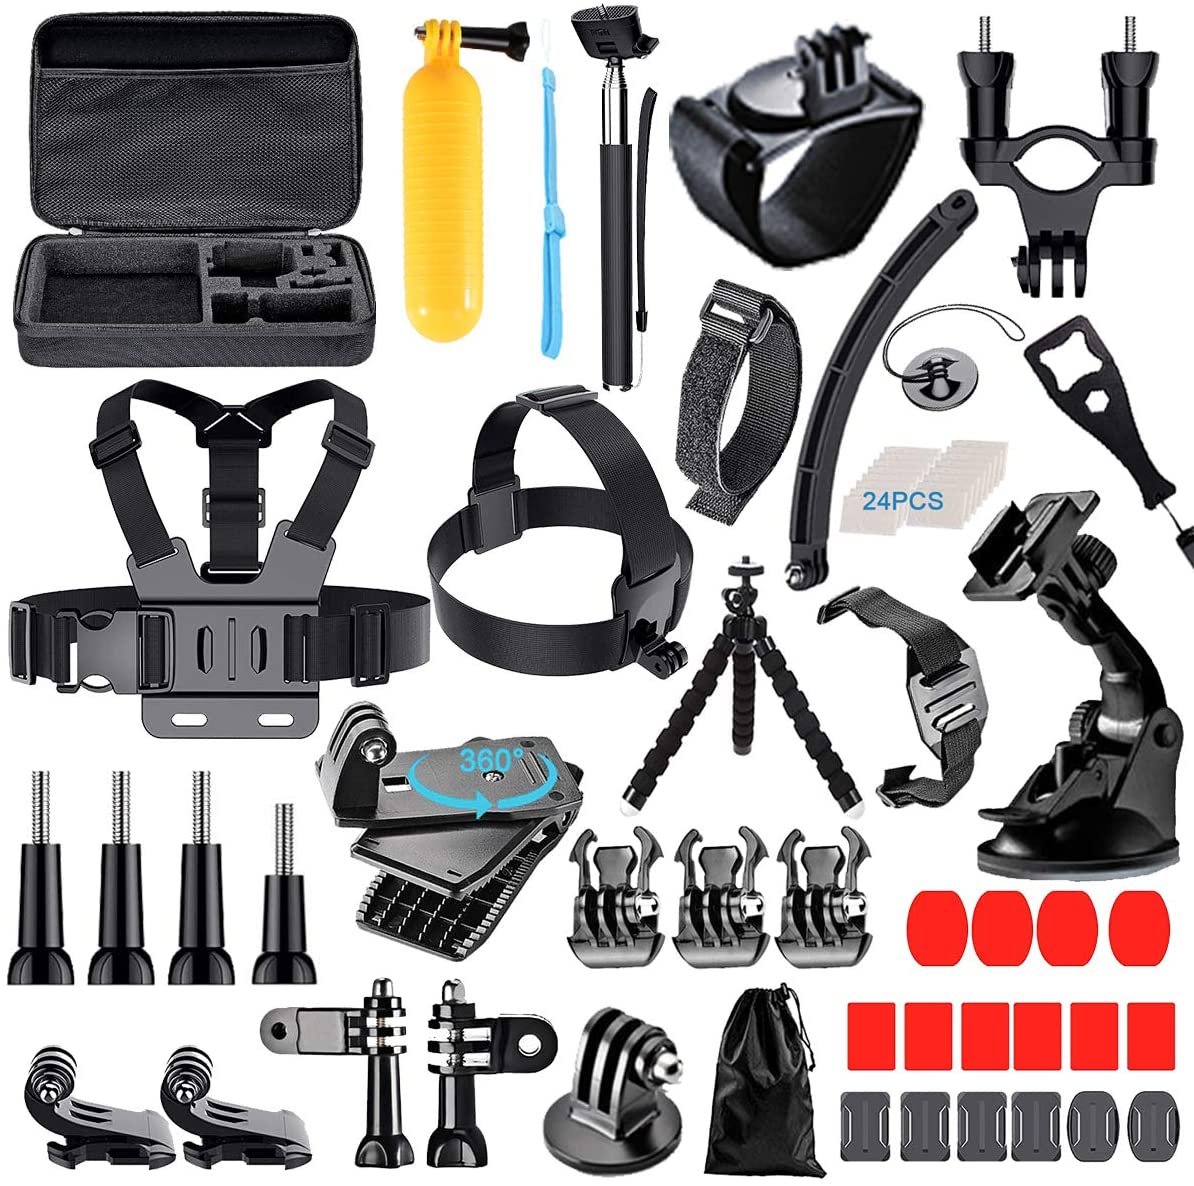 68-in-1 Camera Accessories Kit for GoPro 8/MAX/7 6 5 4 3+/Session 5/AKASO/APEMAN/DBPOWER/Campark/DJI OSMO/Lightdow/SJCAM Various Action Cameras